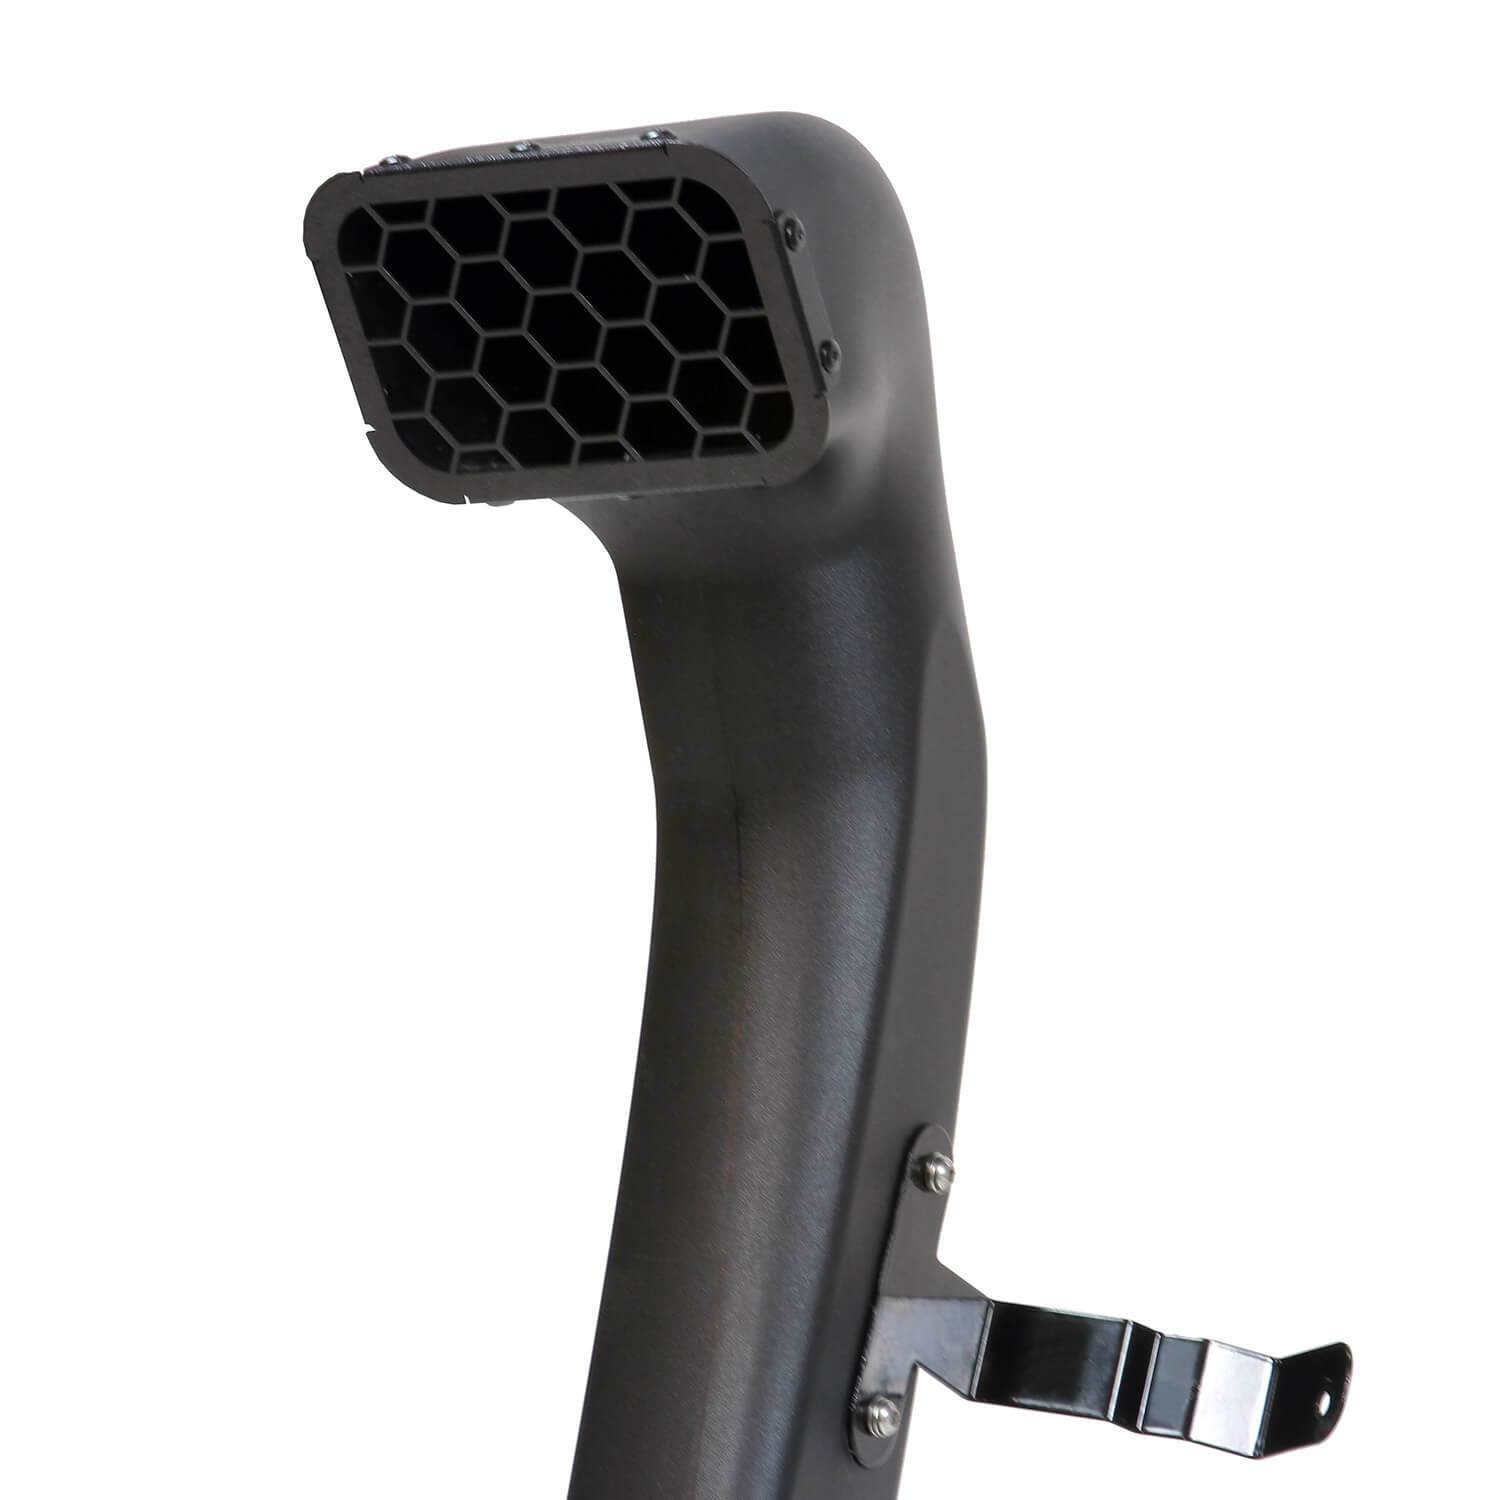 '18-20 Jeep JL 3.6L Delta Force Performance Air Intake Performance Flowmaster (top part)